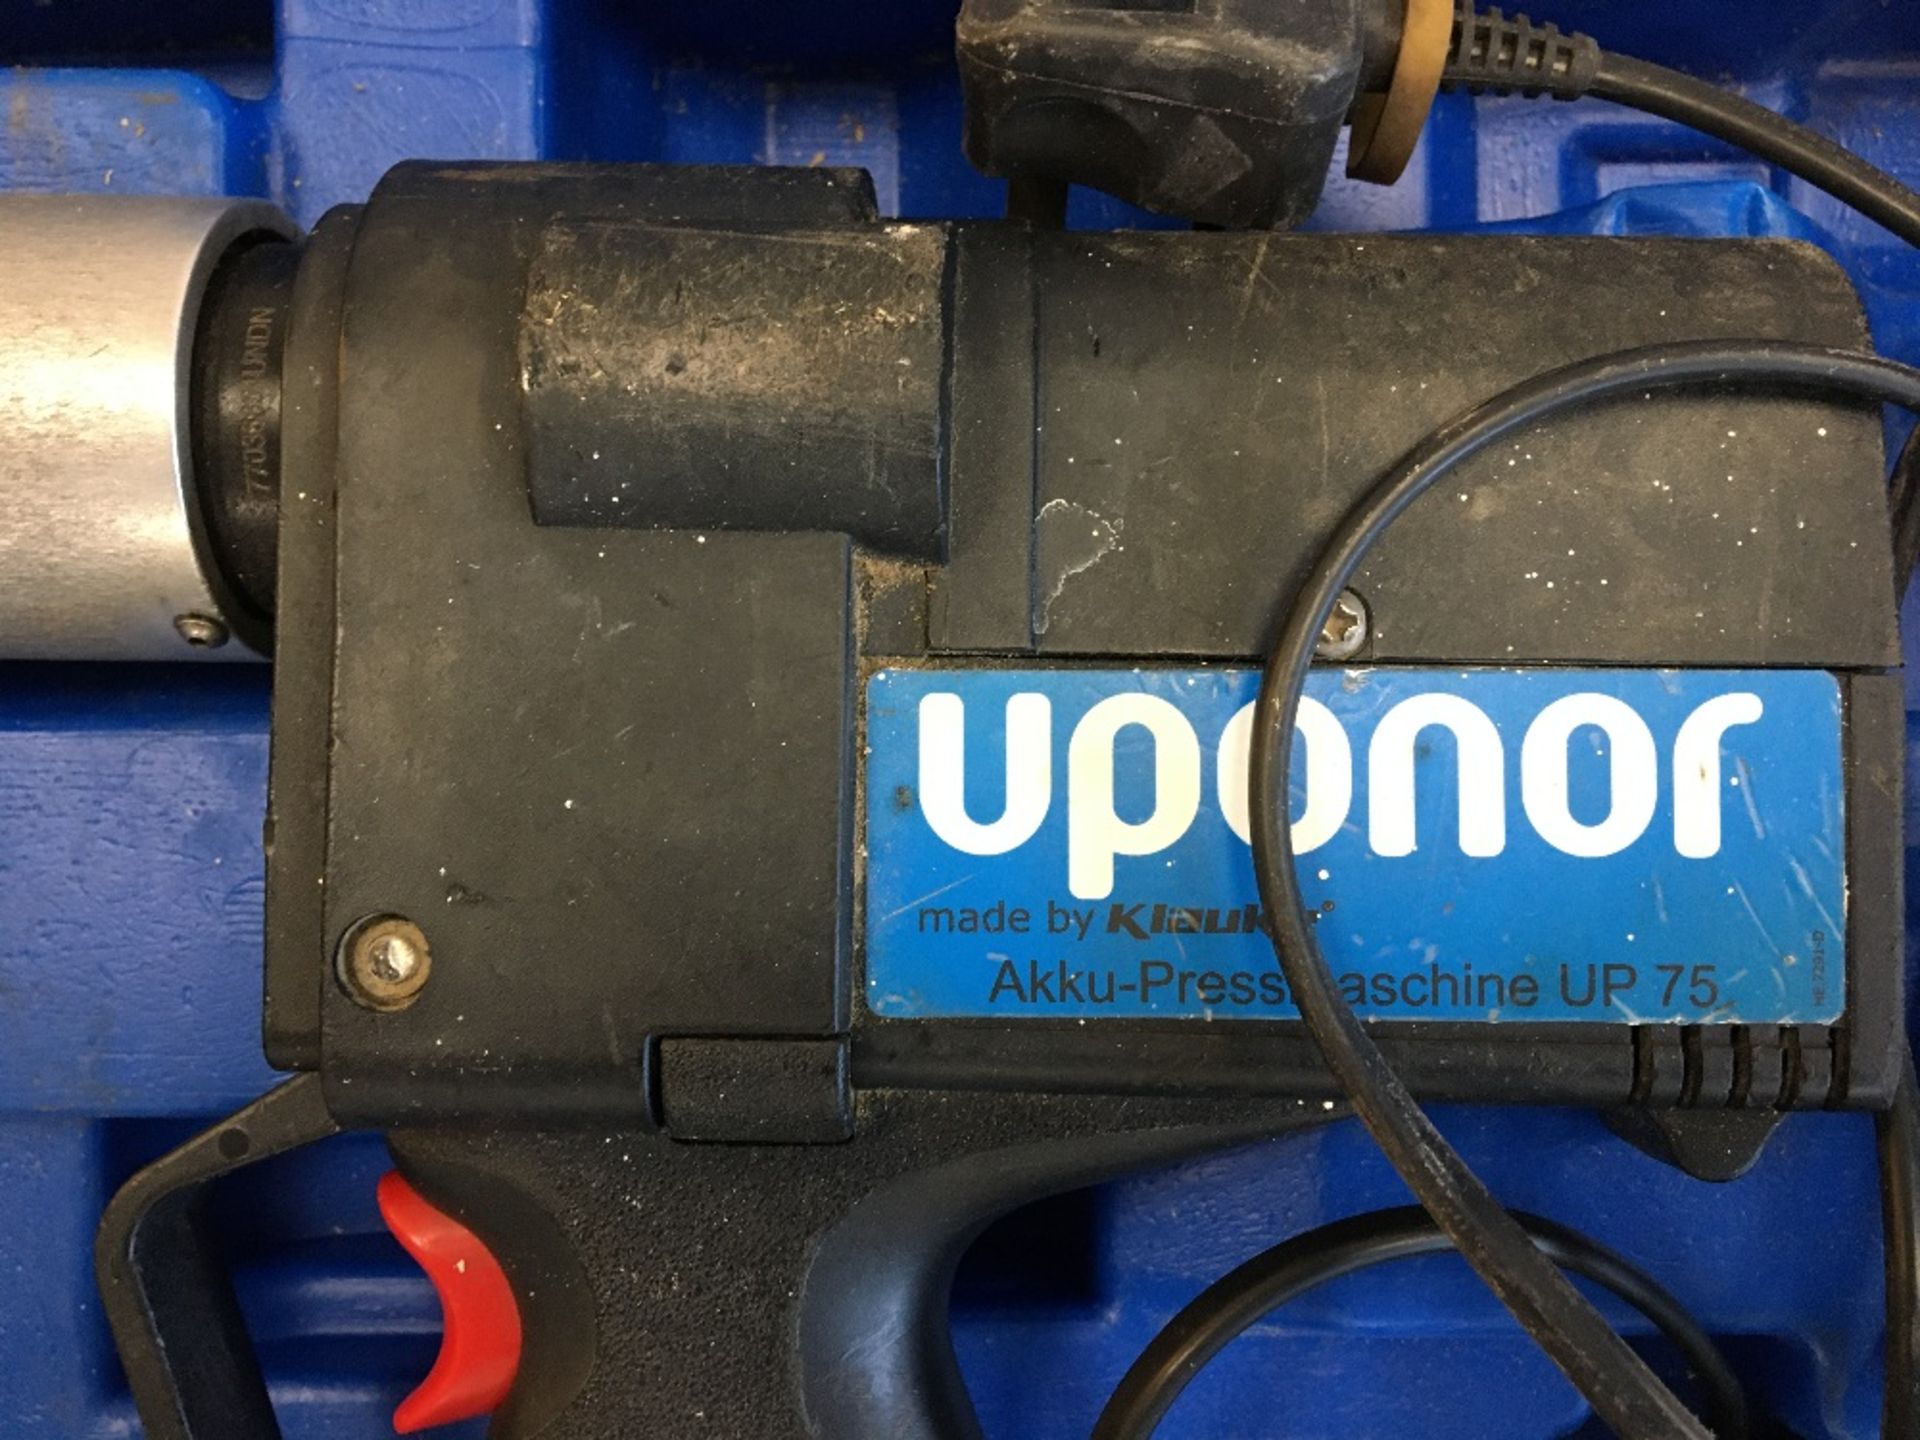 Uponor Akku-pressmachine UP75 Pressgun with battery & charger - Image 5 of 5